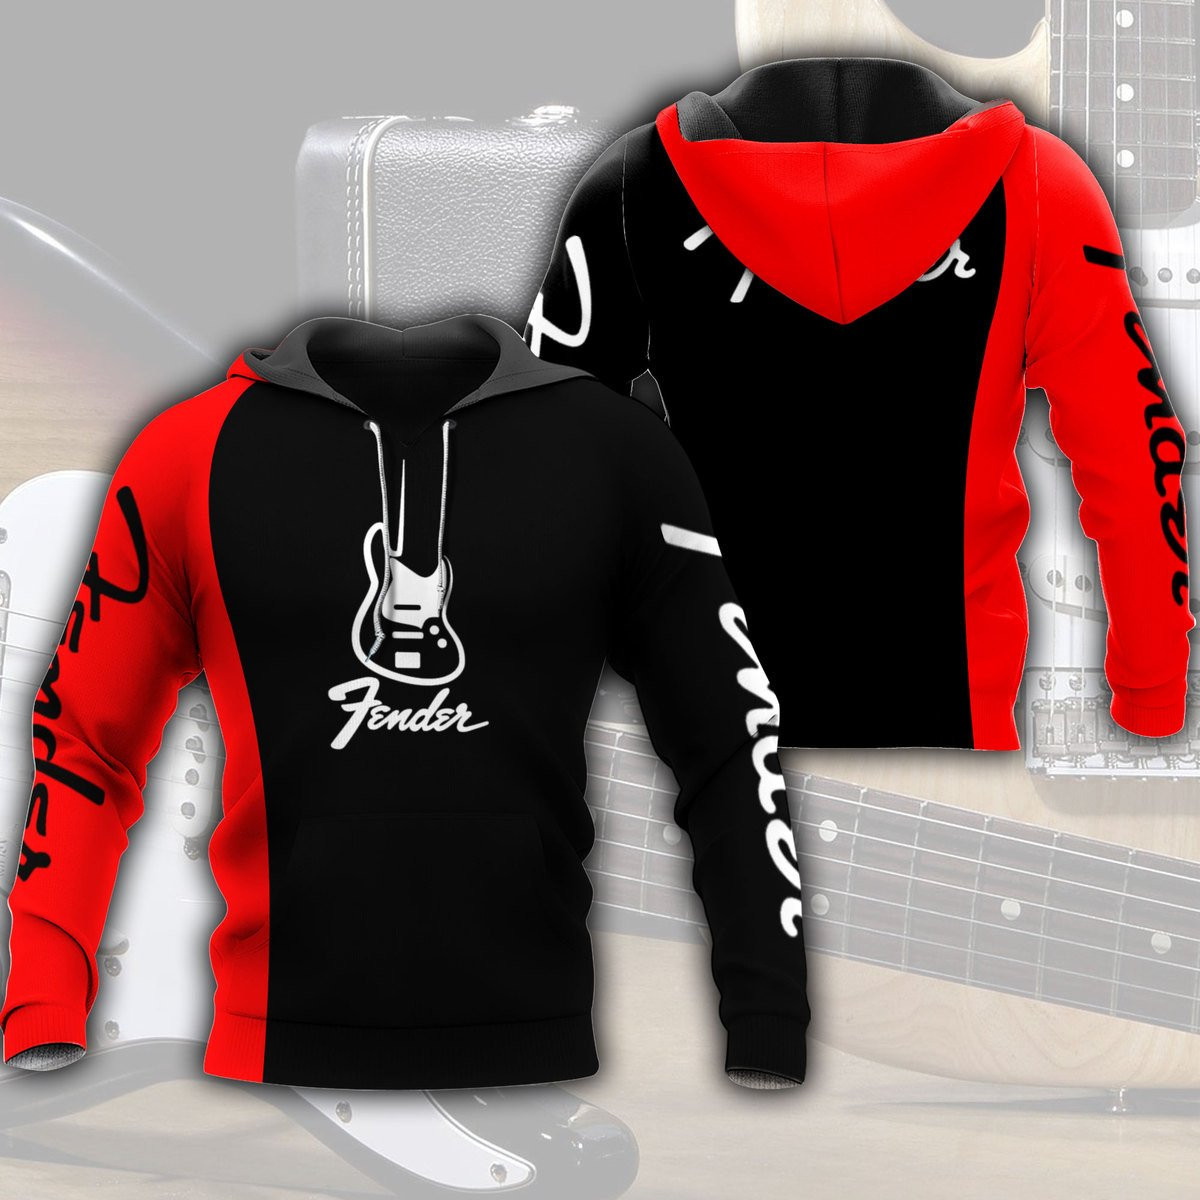 Shop now and get ready to make crazy up in style with top custom hoodie below! 128